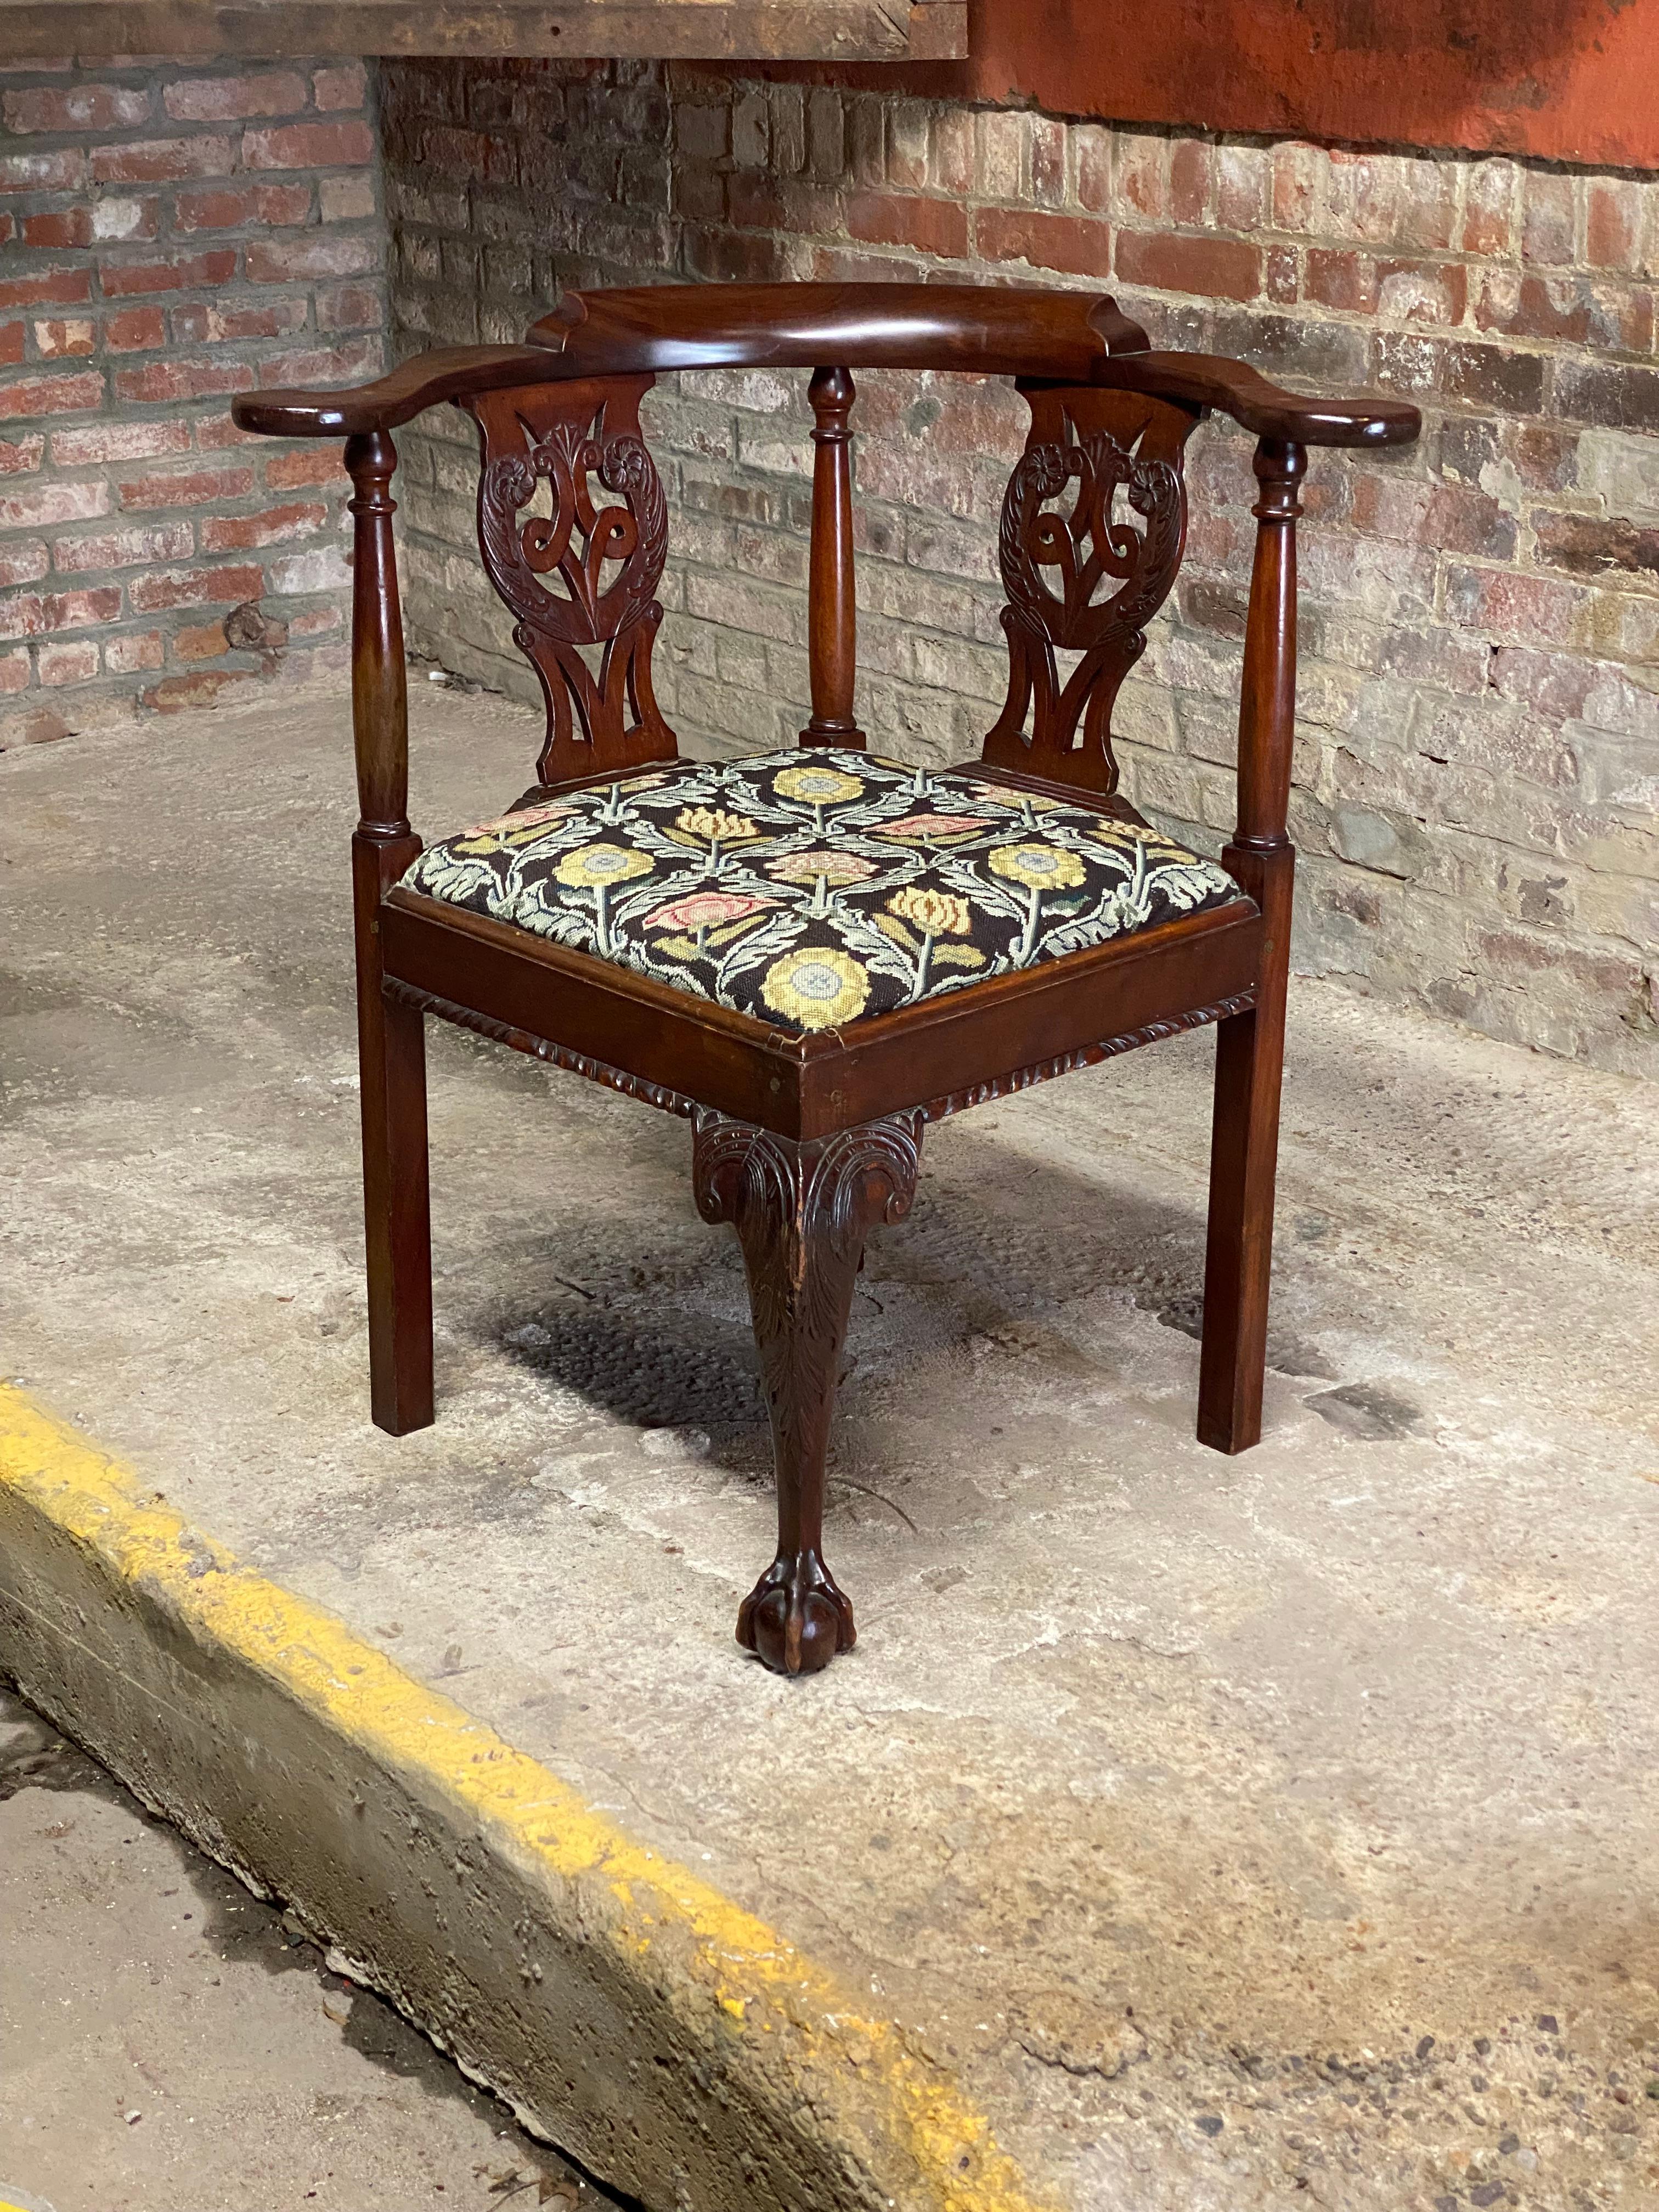 A beautiful piece of Americana. Featured is a carved Mahogany claw and ball foot corner chair with a floral needlepoint slip seat. Finely carved front middle leg with scrolling acanthus leaf design and ending in a claw and ball foot. The back and